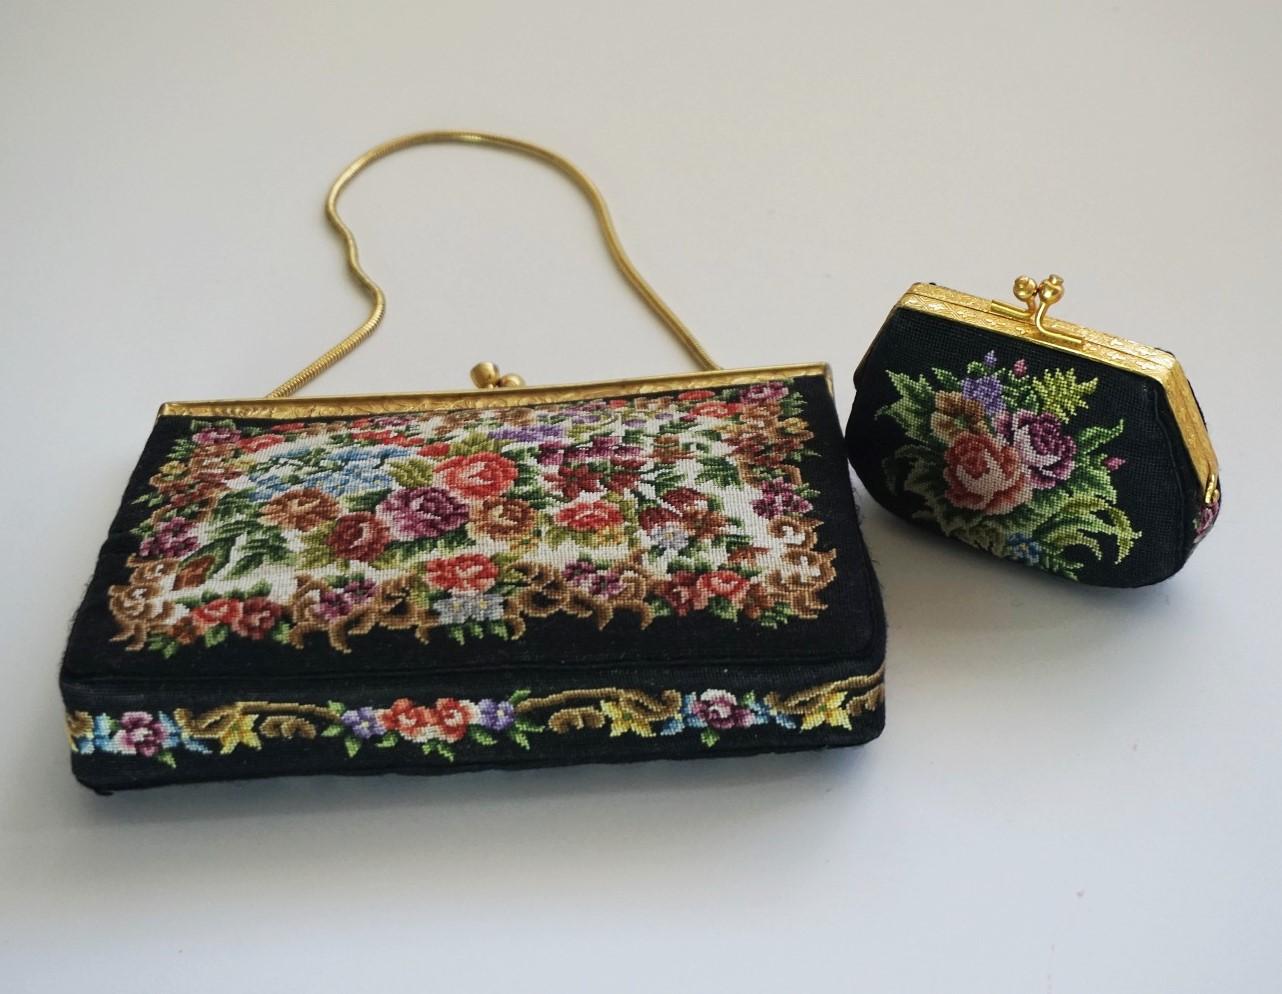 Vintage Gobelin set of clutch handbag and coin purse, black base with floral embroidery on both sides, enameled brass frame and chain strap. The interior is lined in black silk with a slip pocket, France, 1920s.
Measures:
Handbag width 7 in /